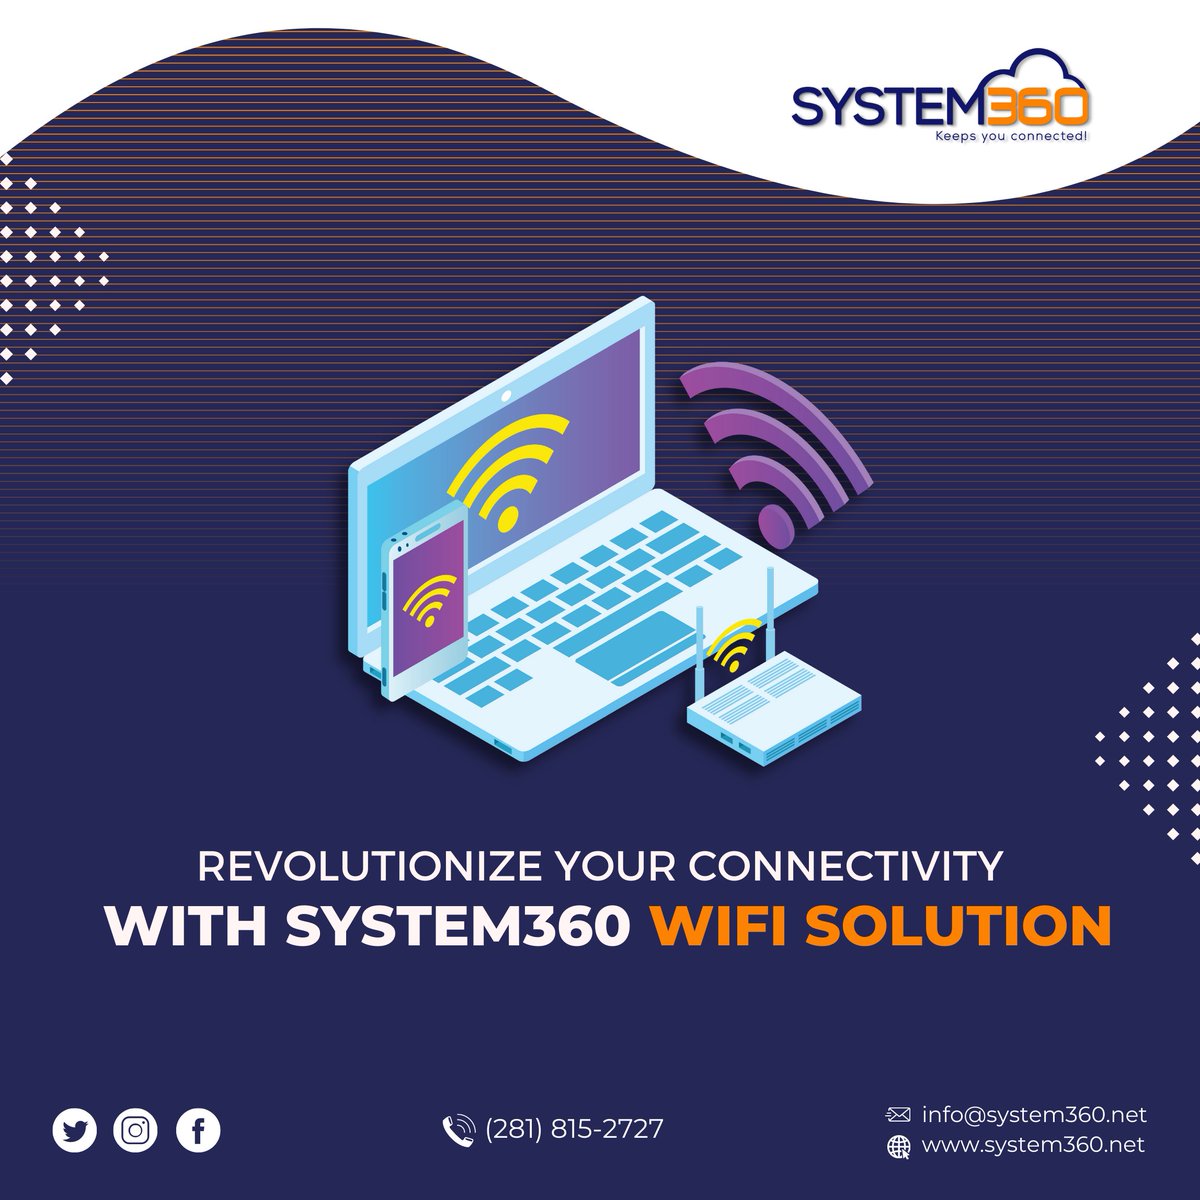 Increase Your Connectivity with System360 Wi-Fi Solution!

system360.net

#WiFisolution #System360 #ManagedITServices #WirelessConnectivity #InternetSolutions #EfficientNetworks #OptimizedNetworks #AdvancedNetworkSolutions #ReliableITInfrastructure #EffortlessConnection